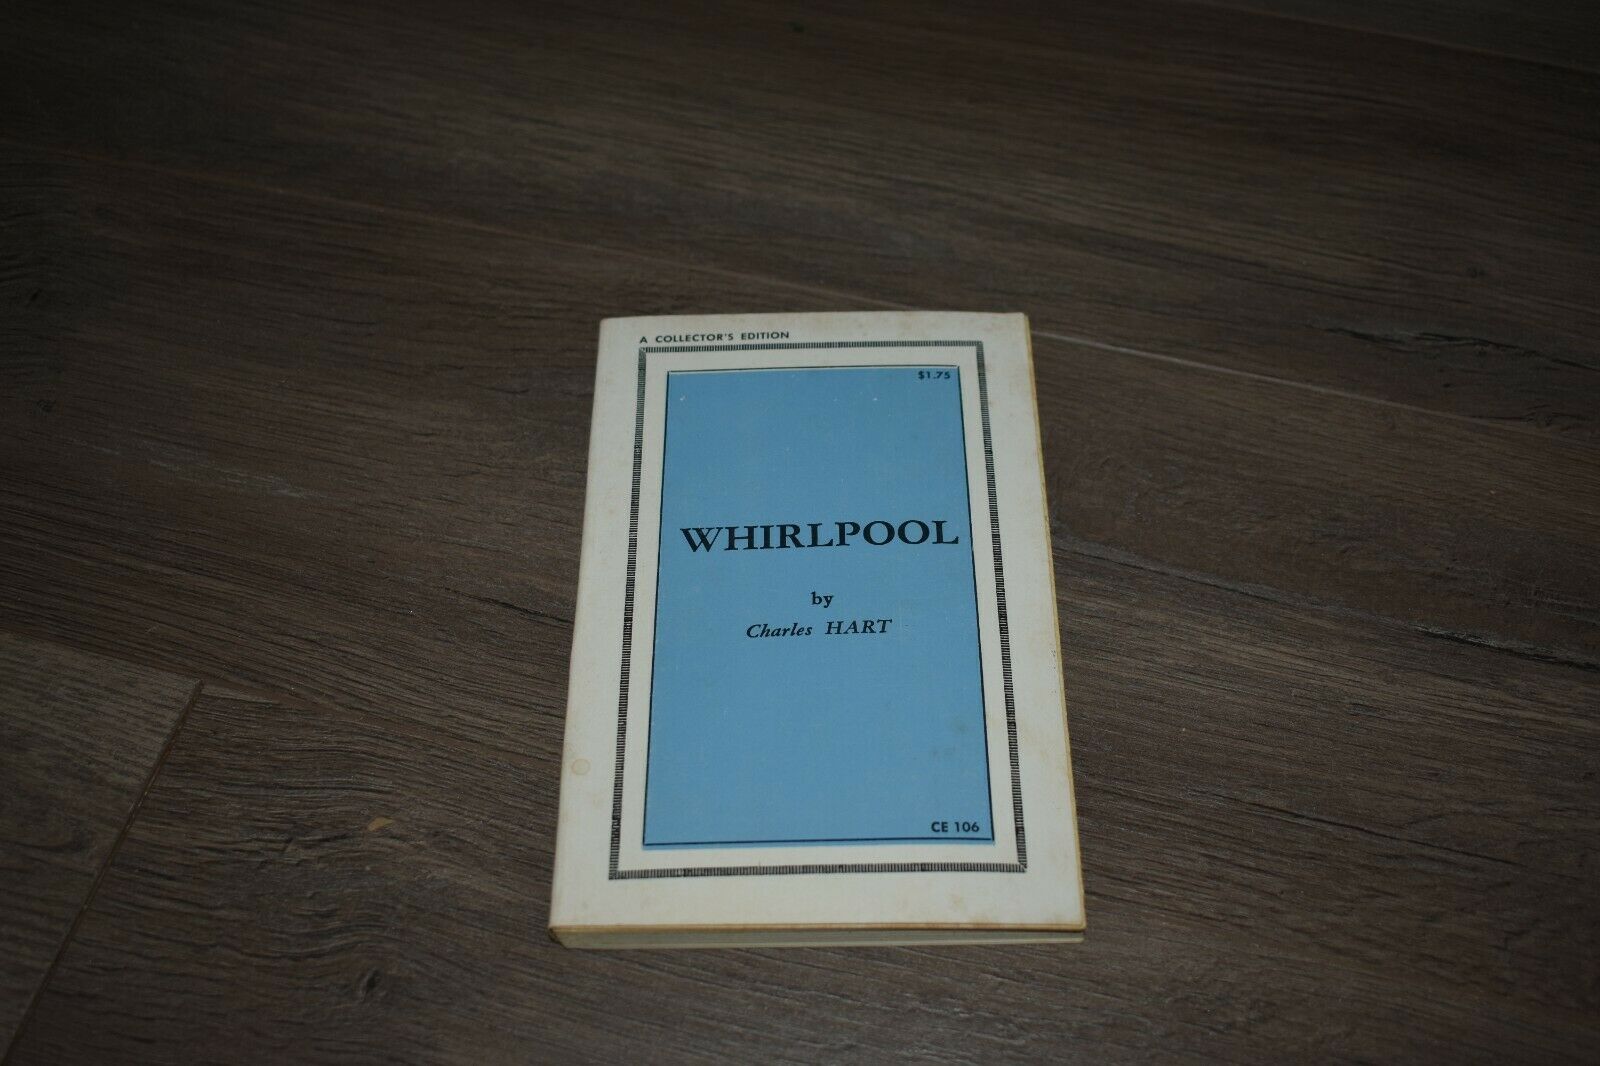 Whirlpool by Charles Hart 1967 paperback book